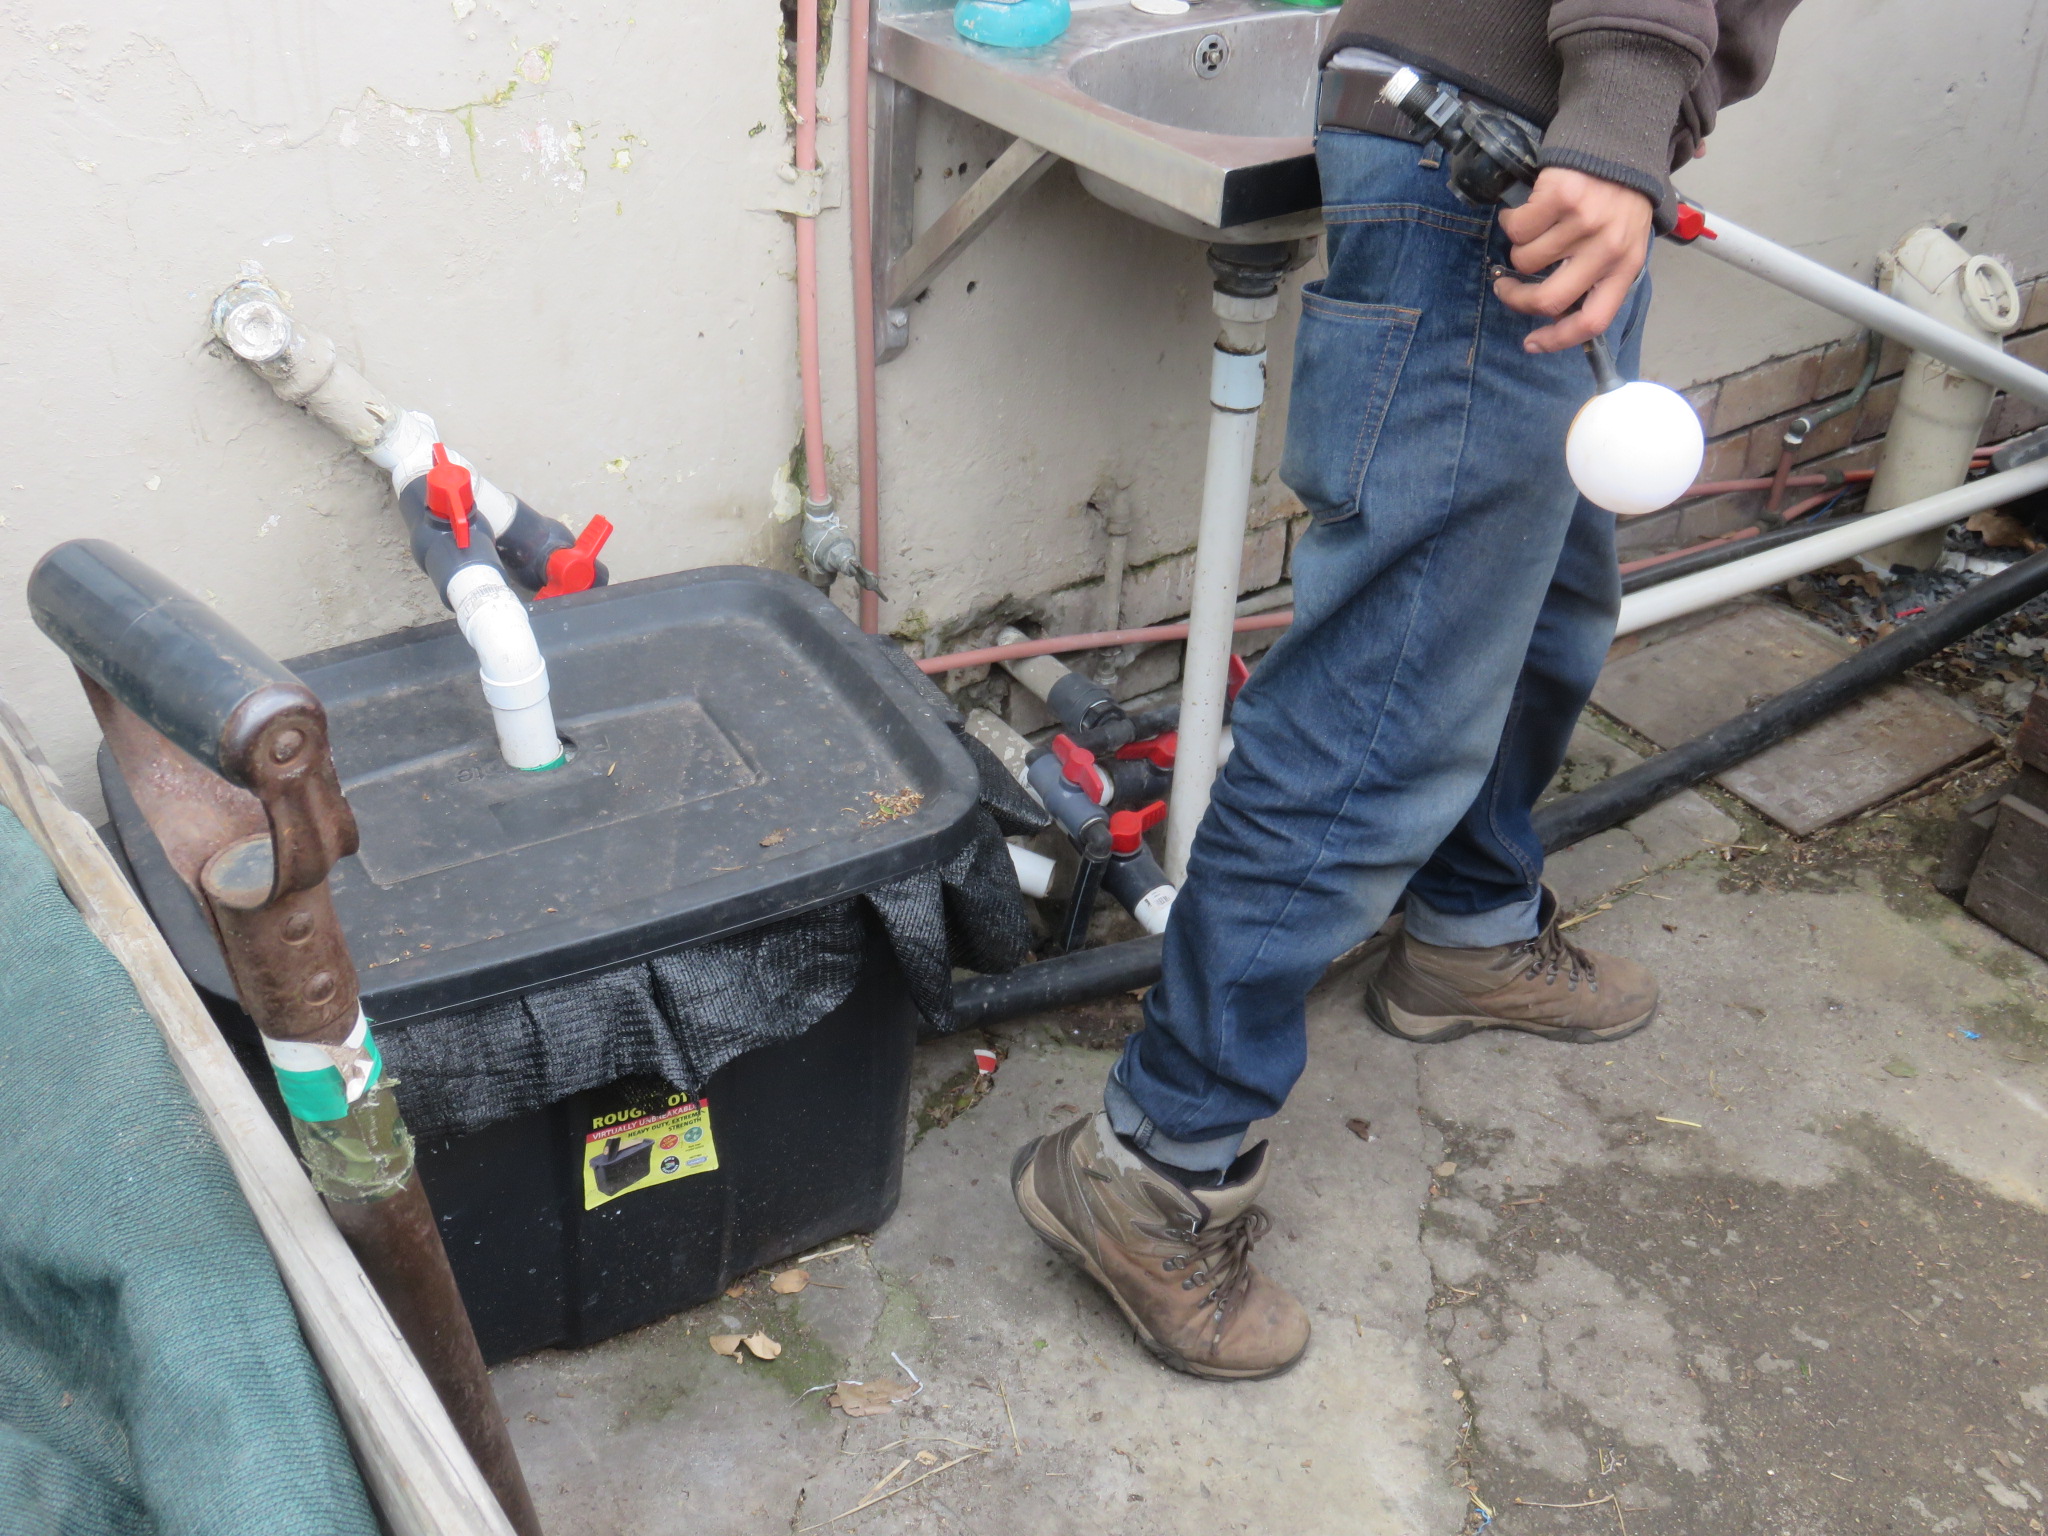 kitchen sink outflow into worm bin with diversion into waste water if needed. Worm bin lead into surge tank.